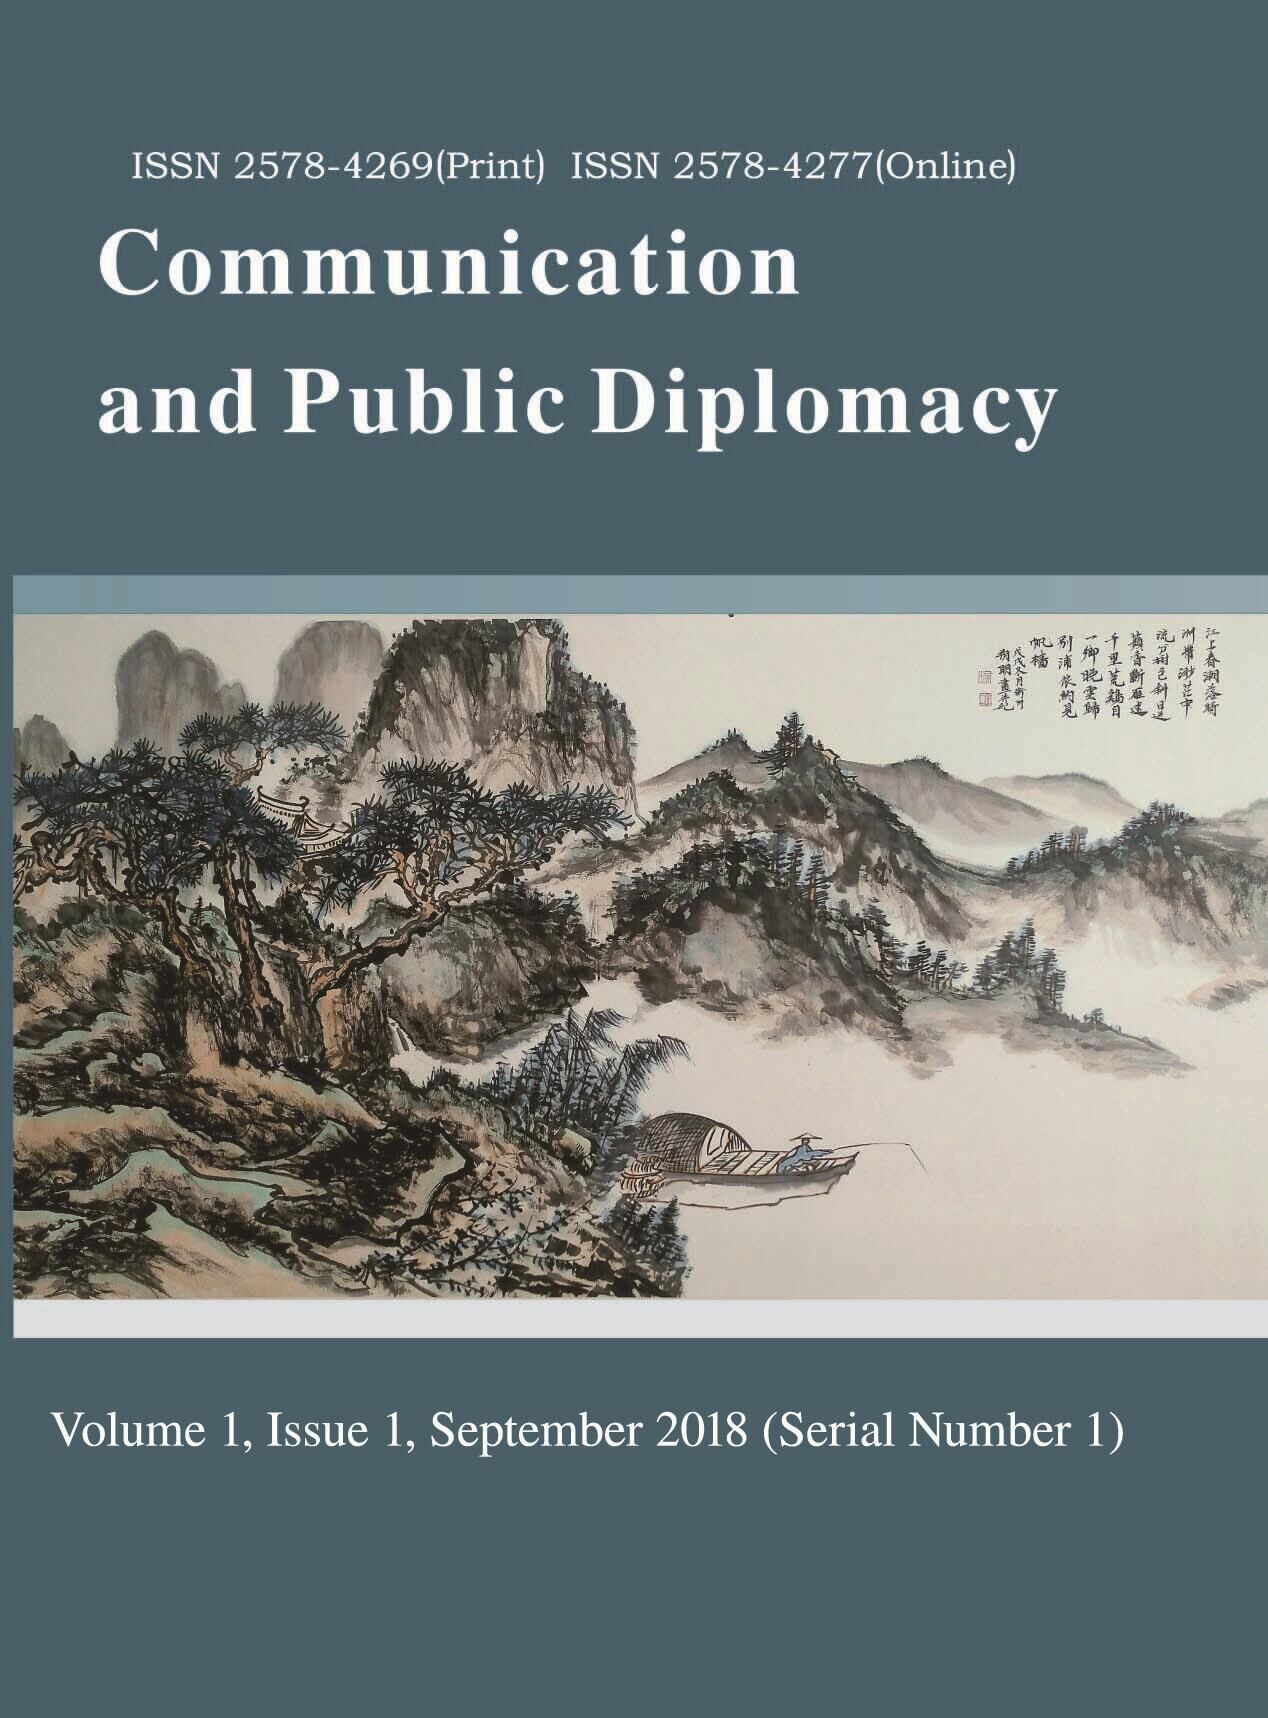 Communication and Public Diplomacy